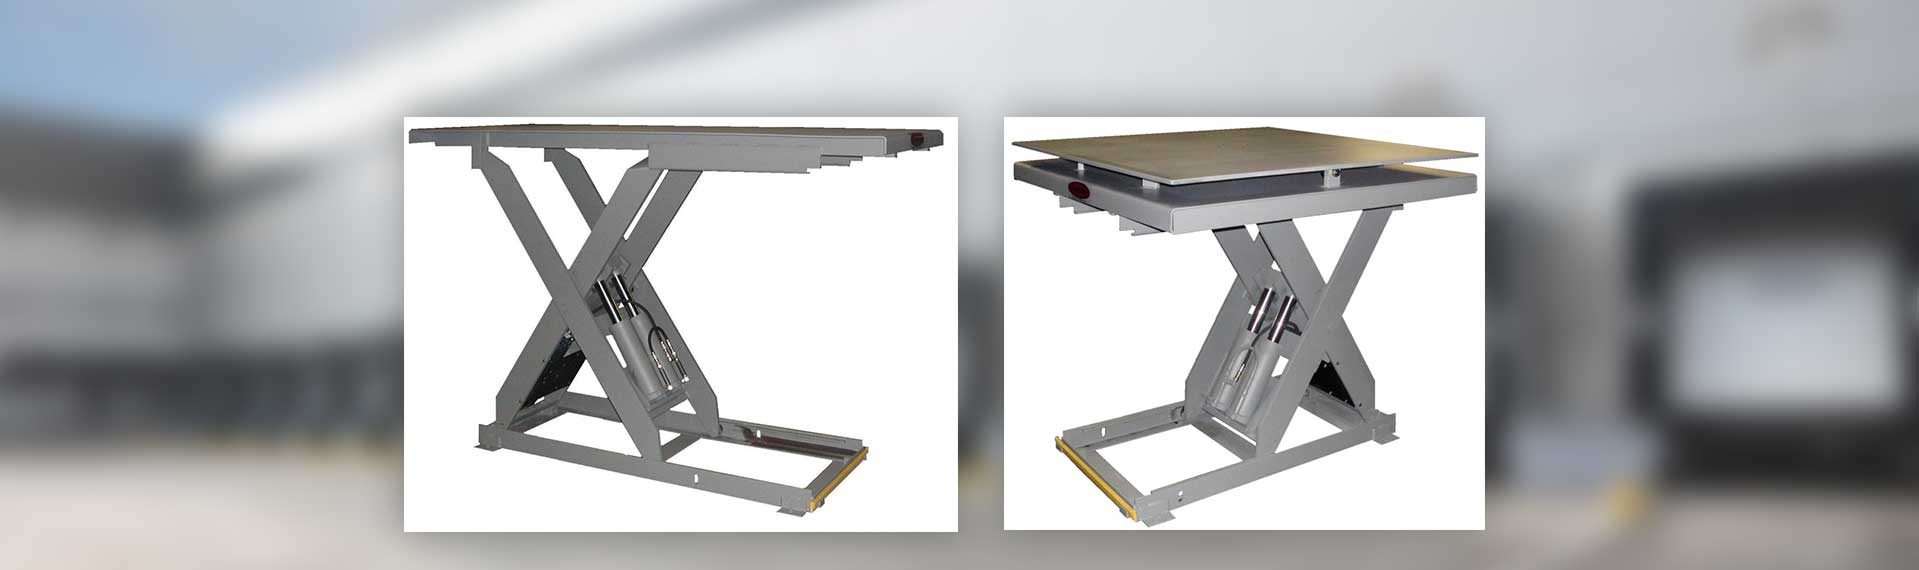 YARD-RAMP-SITE tables for dock lifts